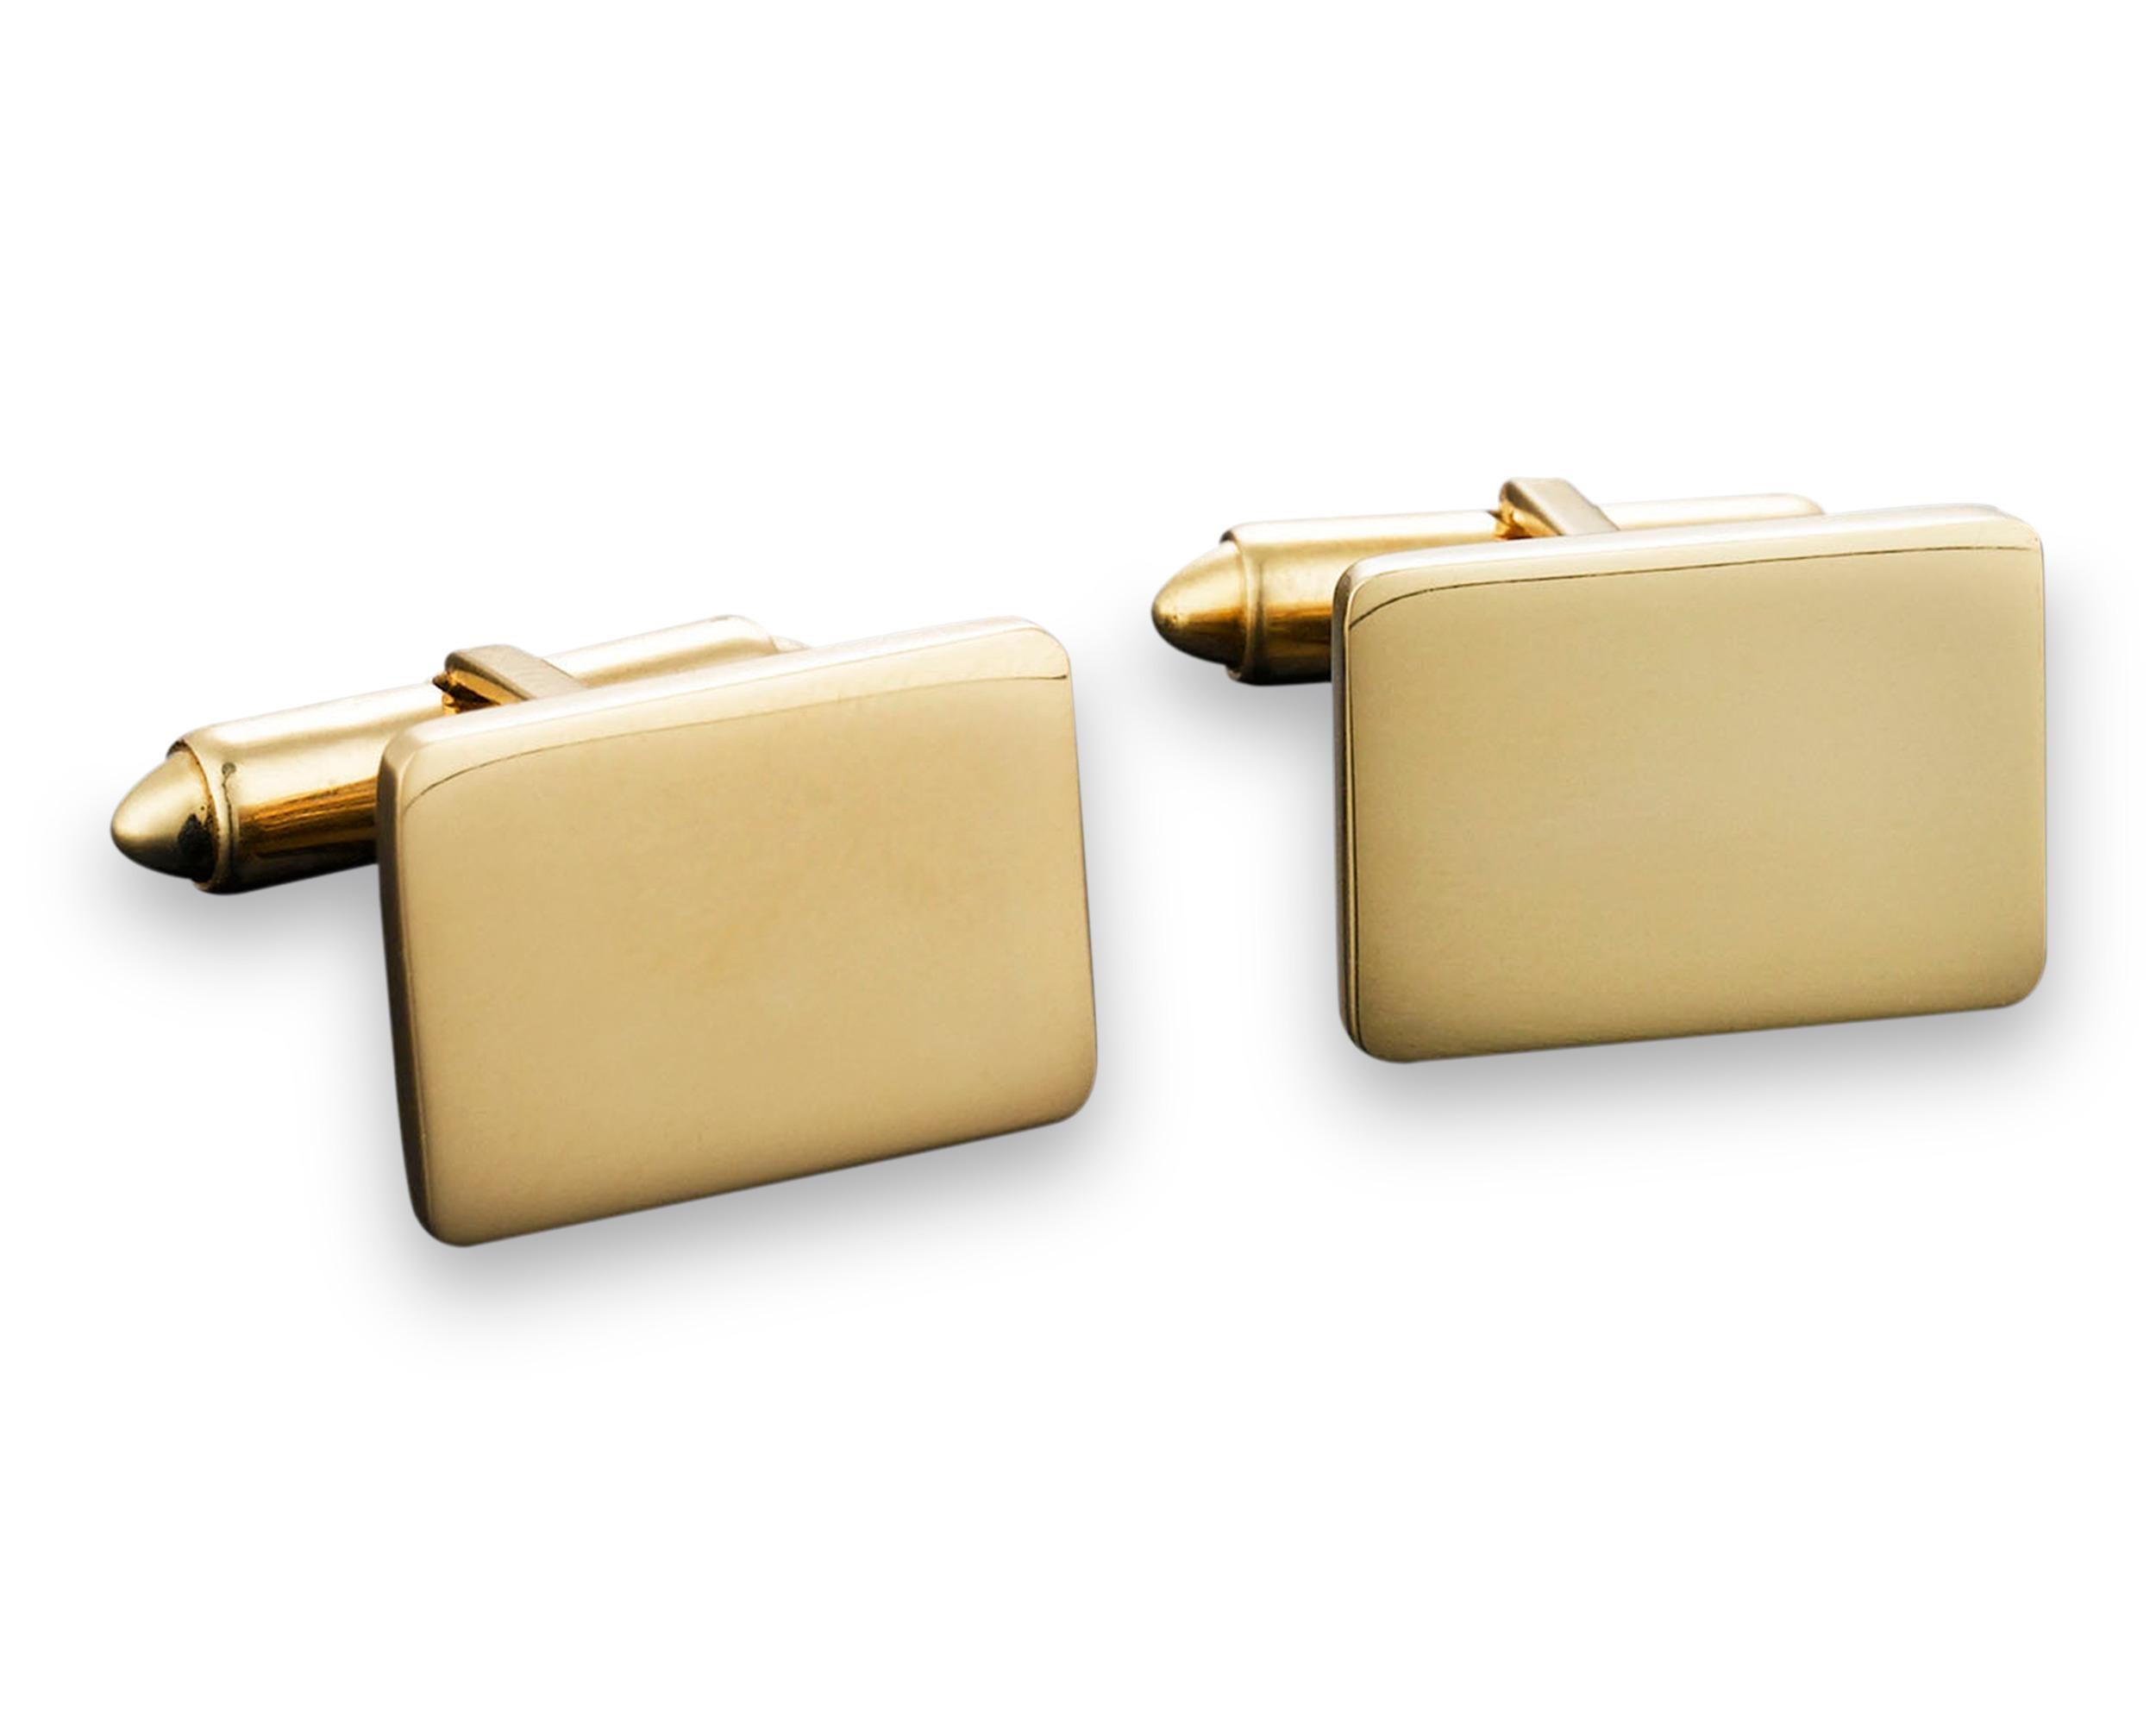 These stylish 14K yellow gold cufflinks instantly add a sleek, sophisticated touch to any well-heeled gentleman's wardrobe.

3/4